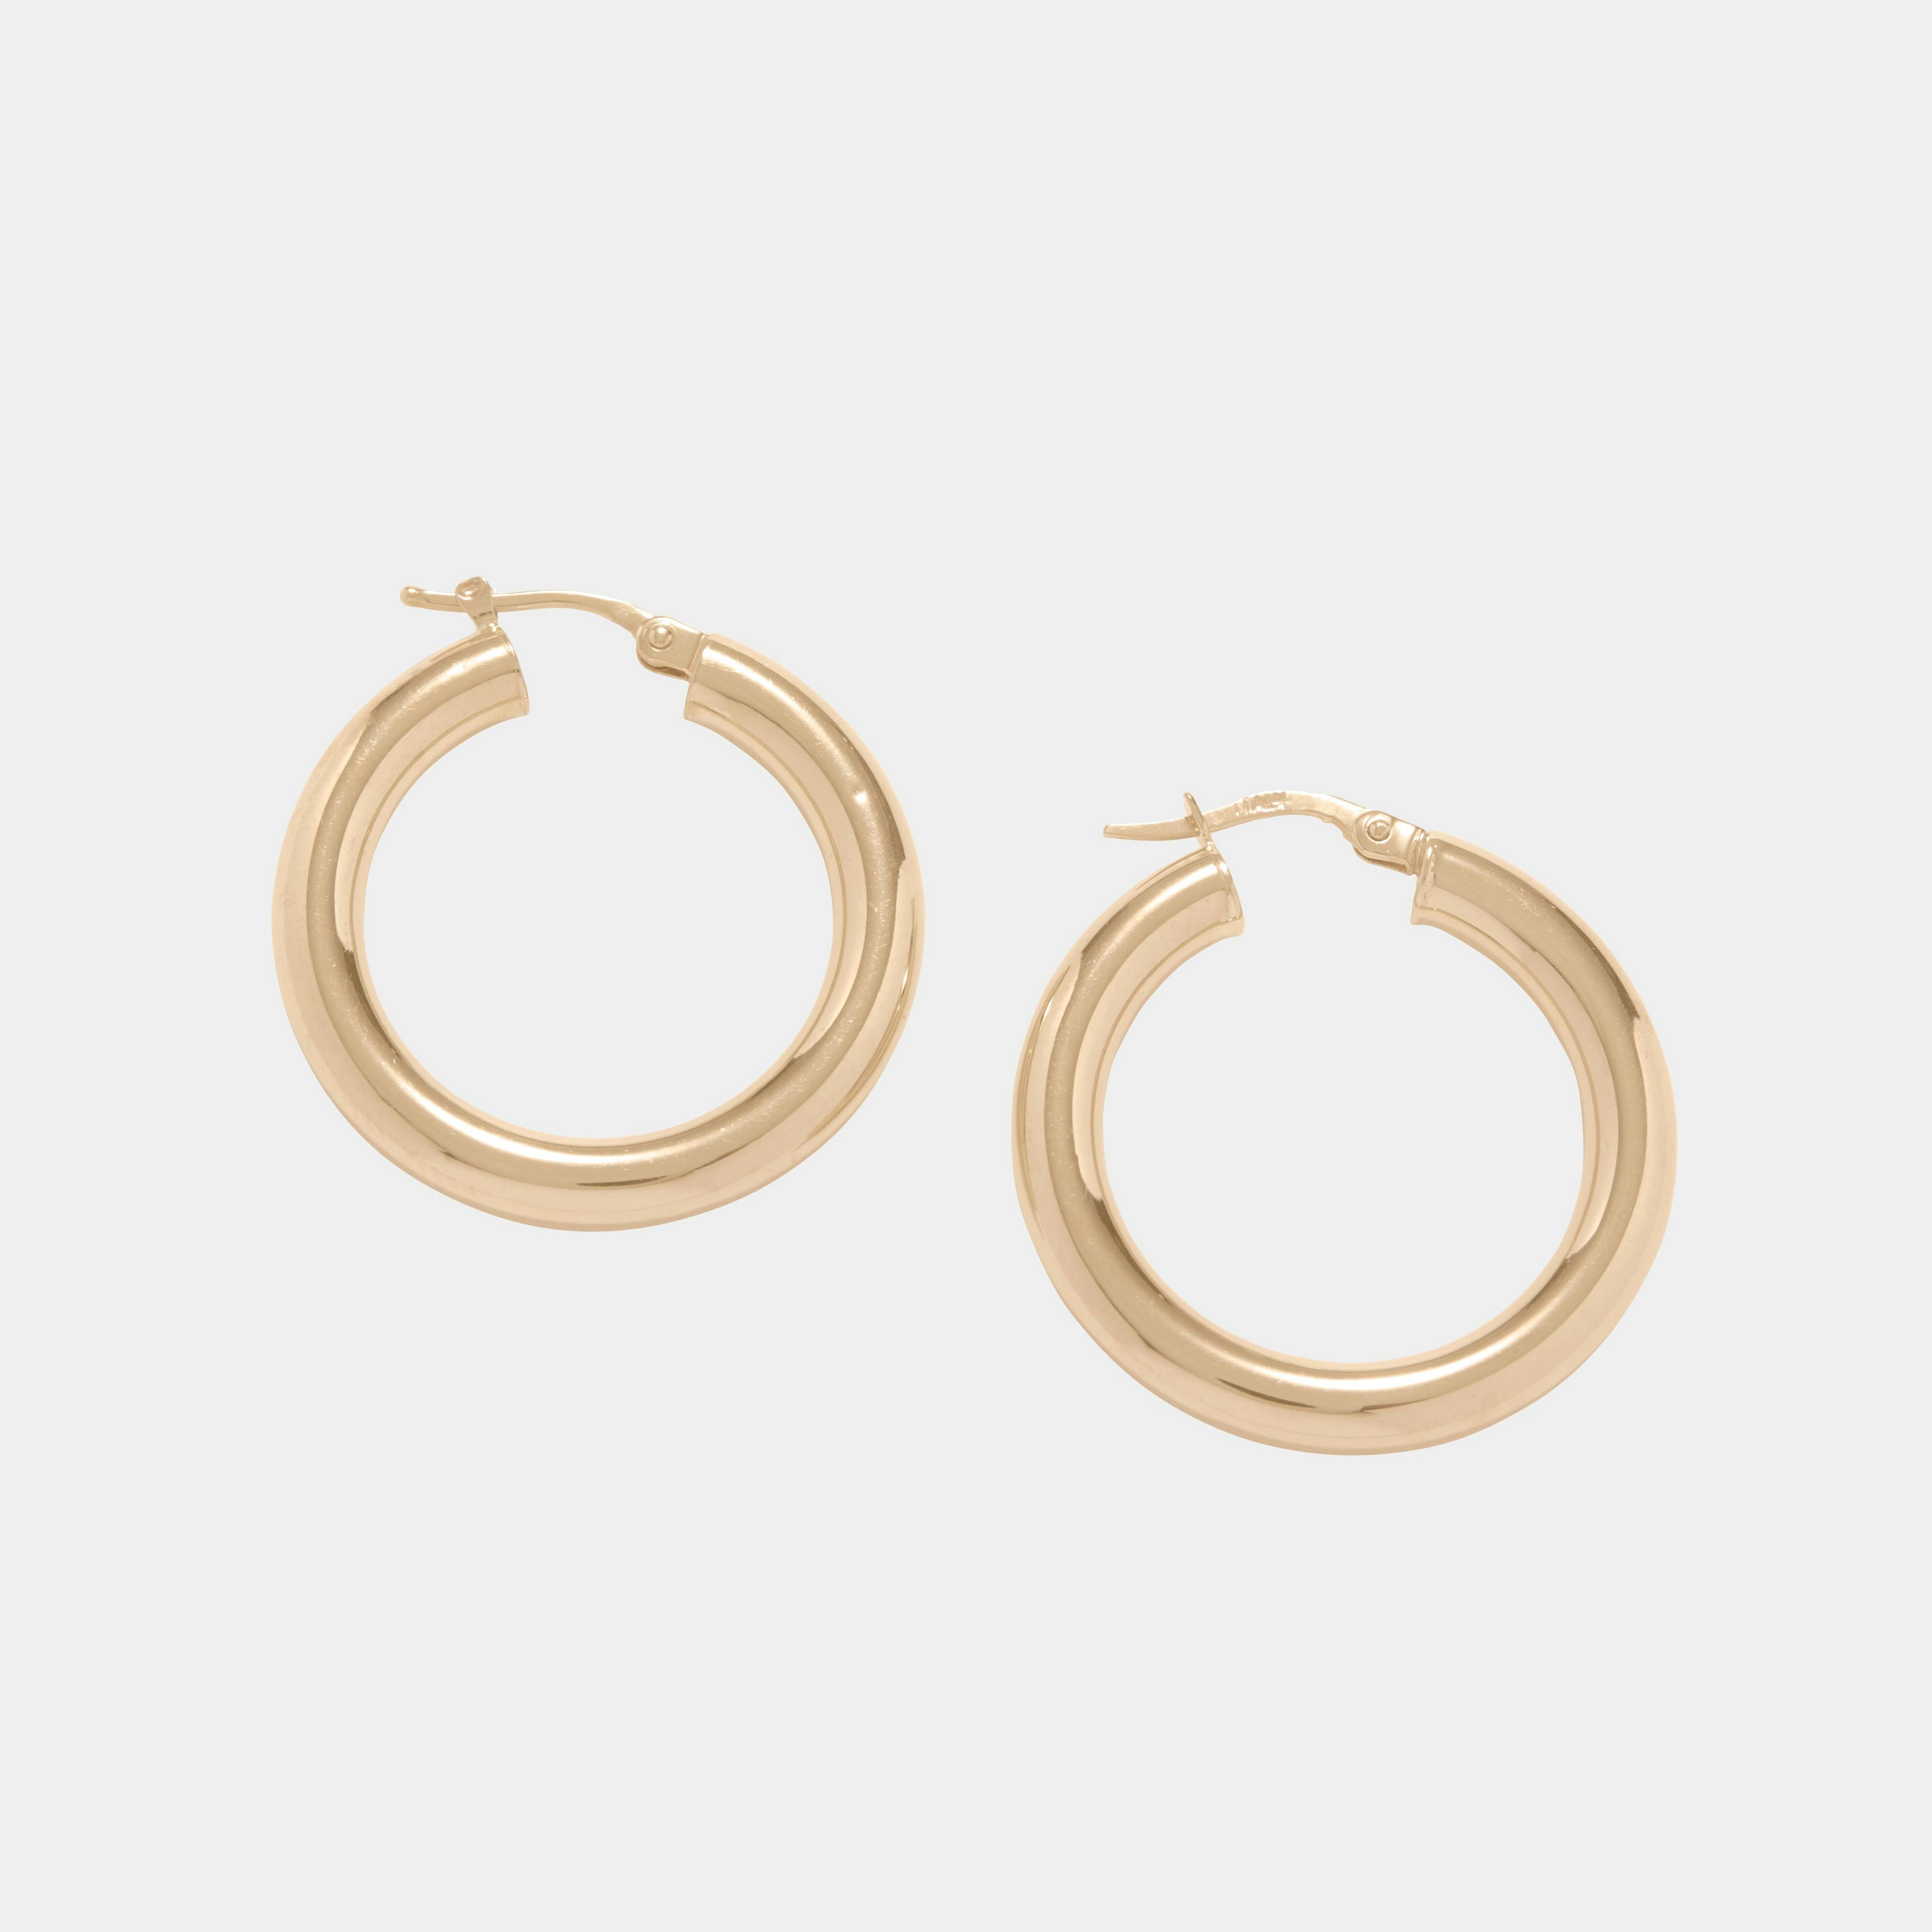 4mm hollow gold hoops